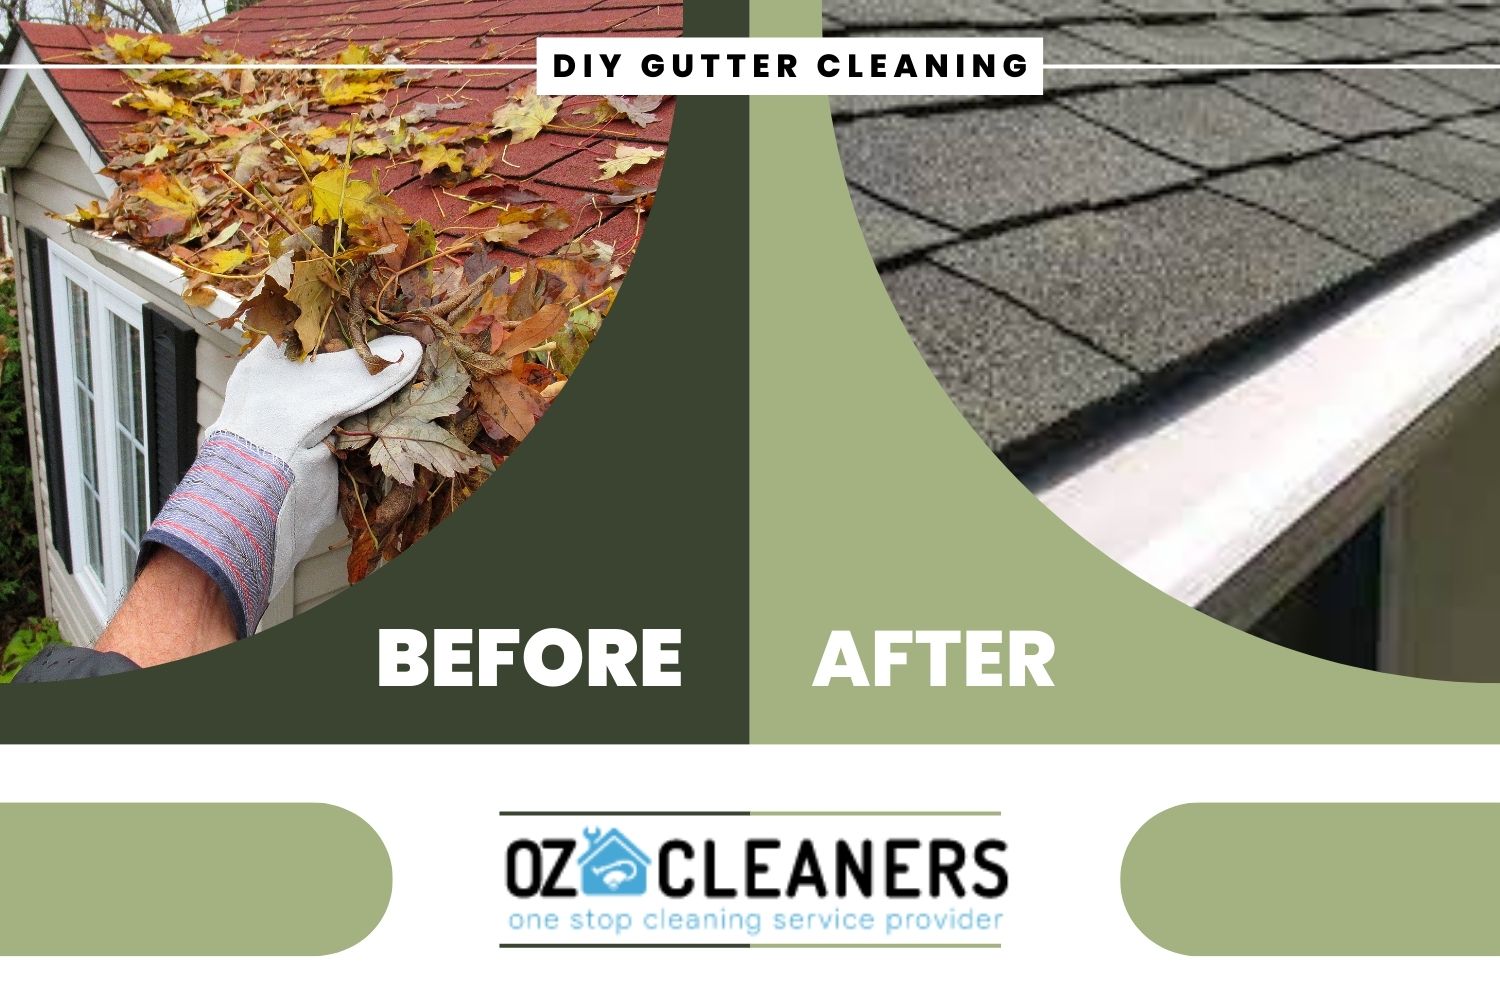 DIY Gutter Cleaning Tips